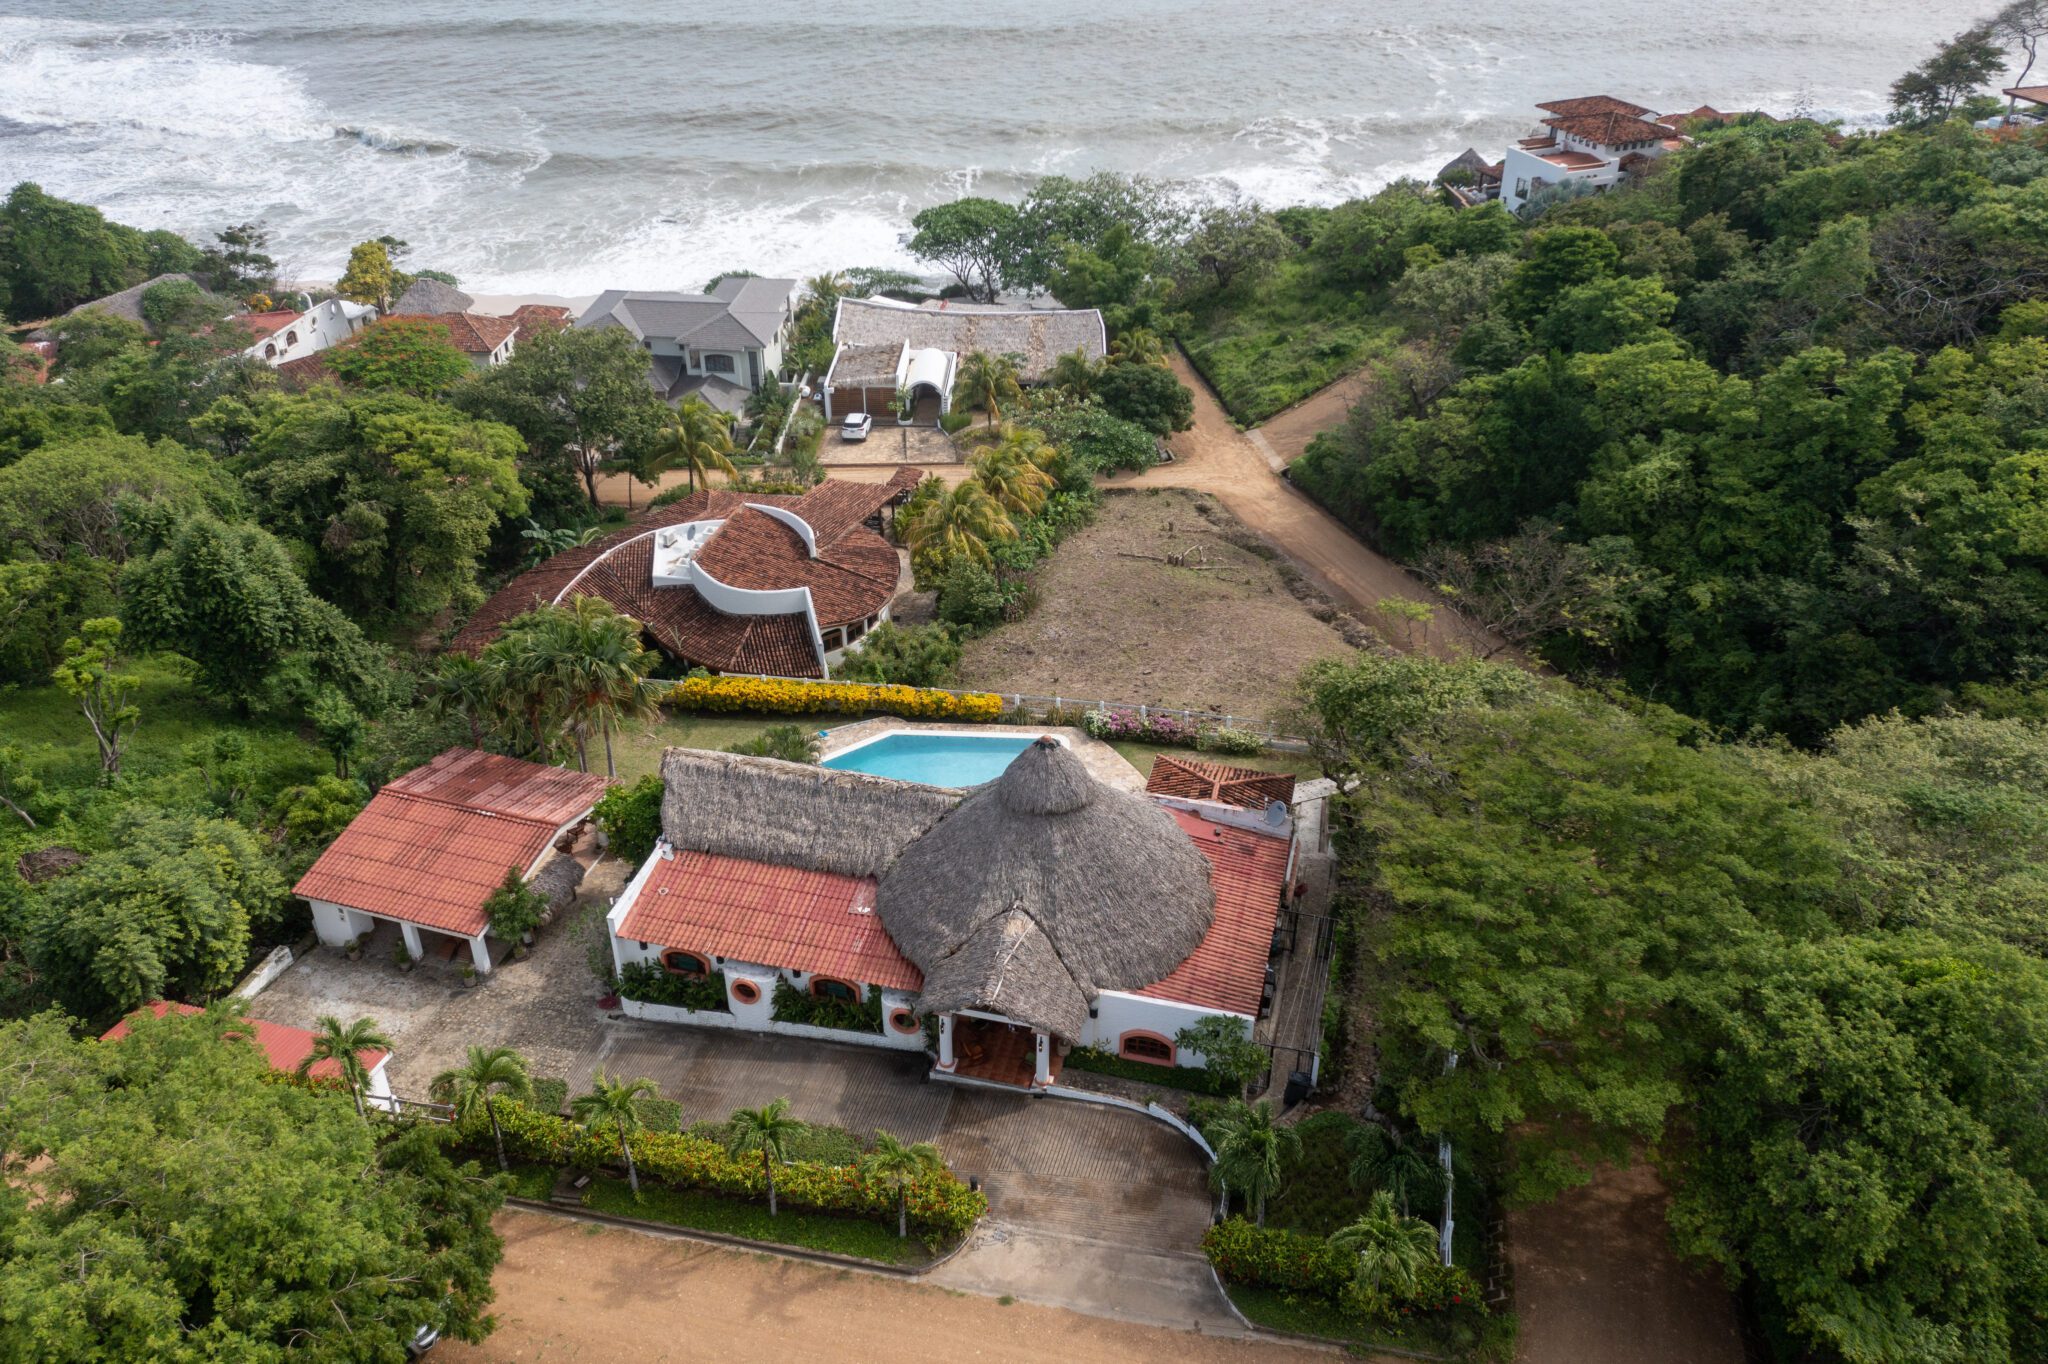 http://view%20of%20the%20ocean%20from%20a%20Rancho%20Santana%20Property%20for%20Sale%20in%20Nicaragua%20B13